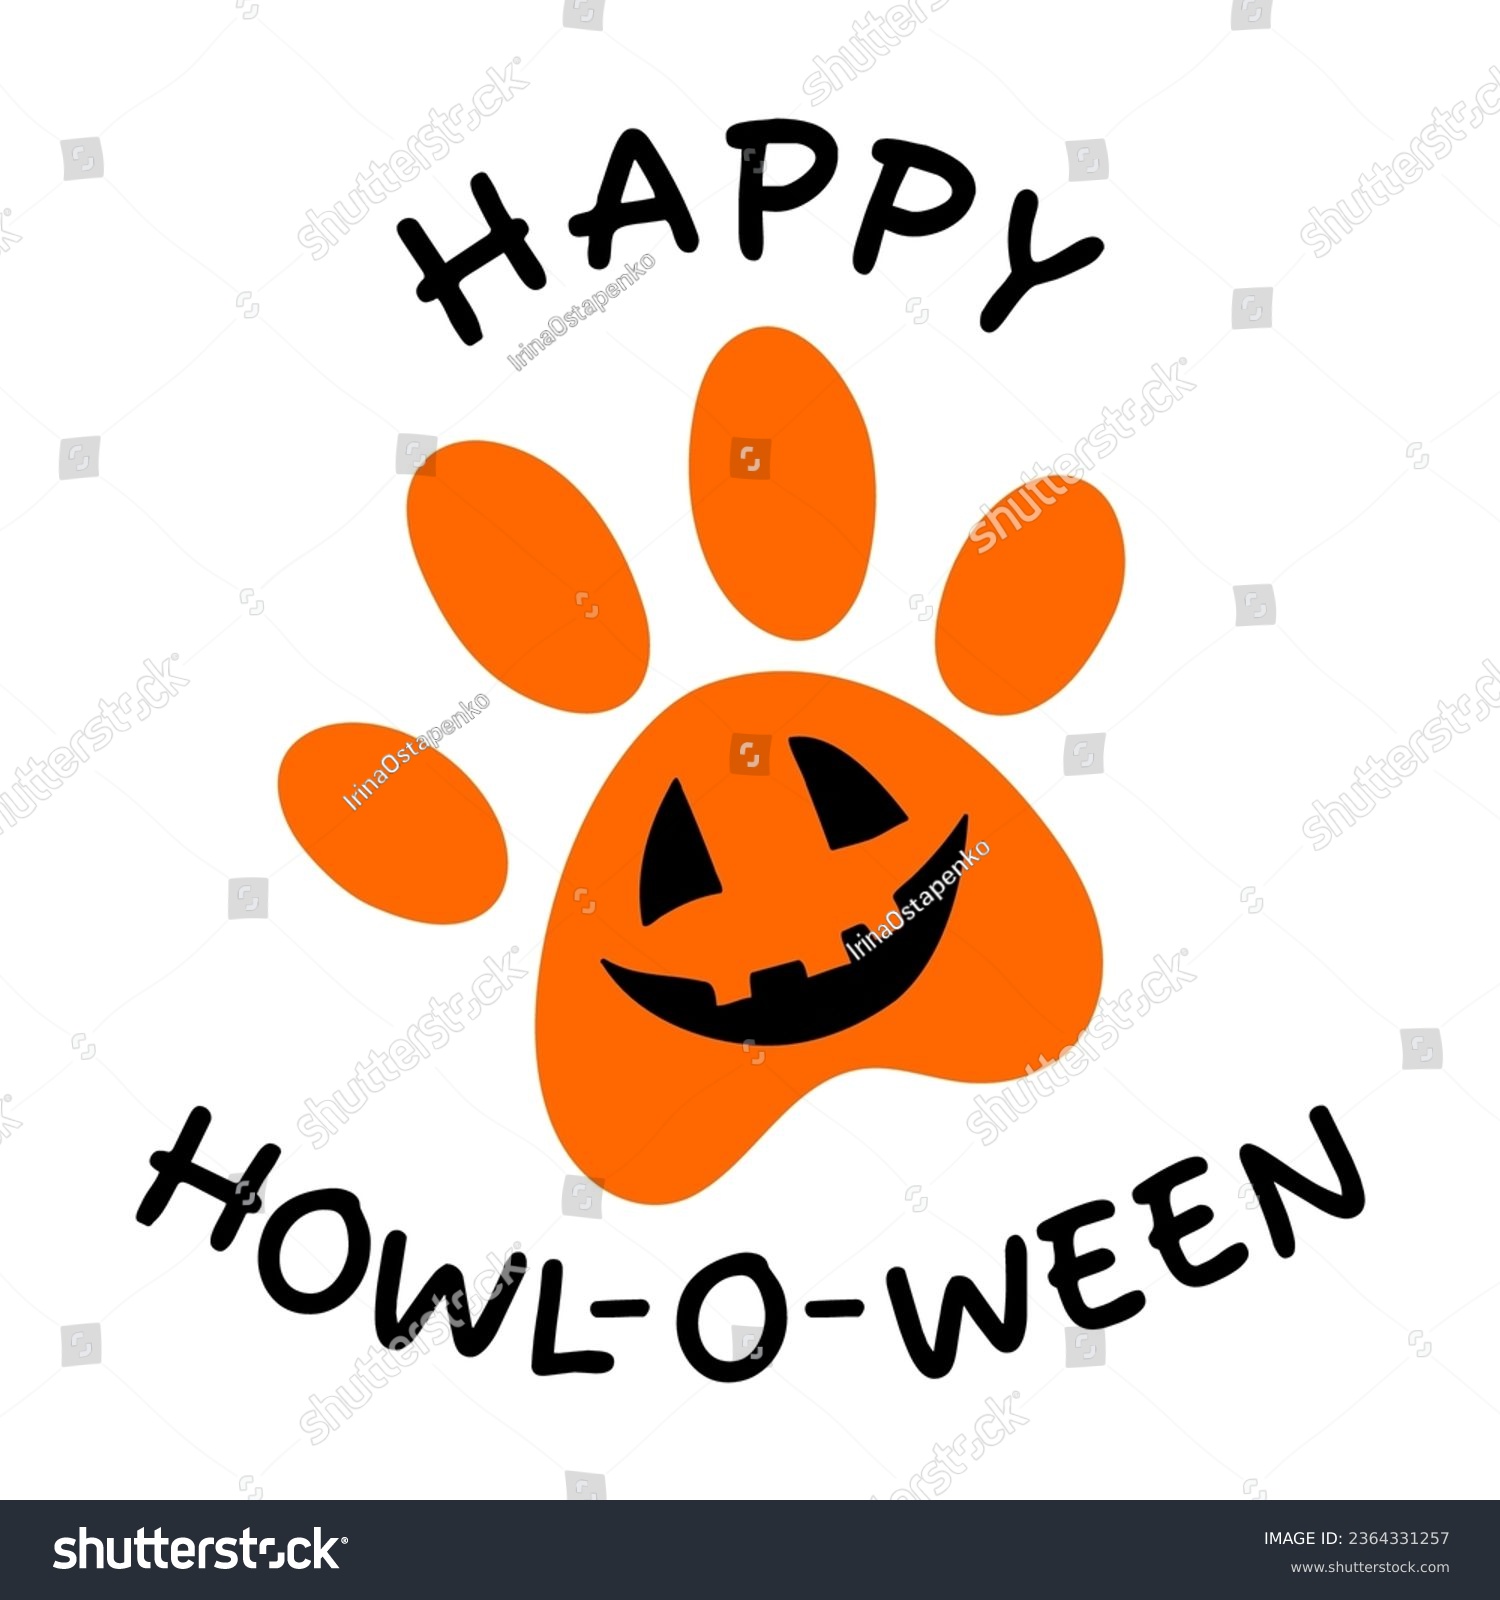 SVG of HAPPY HOWL-O-WEEN. Dog paw with pumpkin. Happy Halloween. Paws prints dog. Love dogs. Fall, autumn, Thanksgiving, Halloween element for design.Isolated on white background. svg